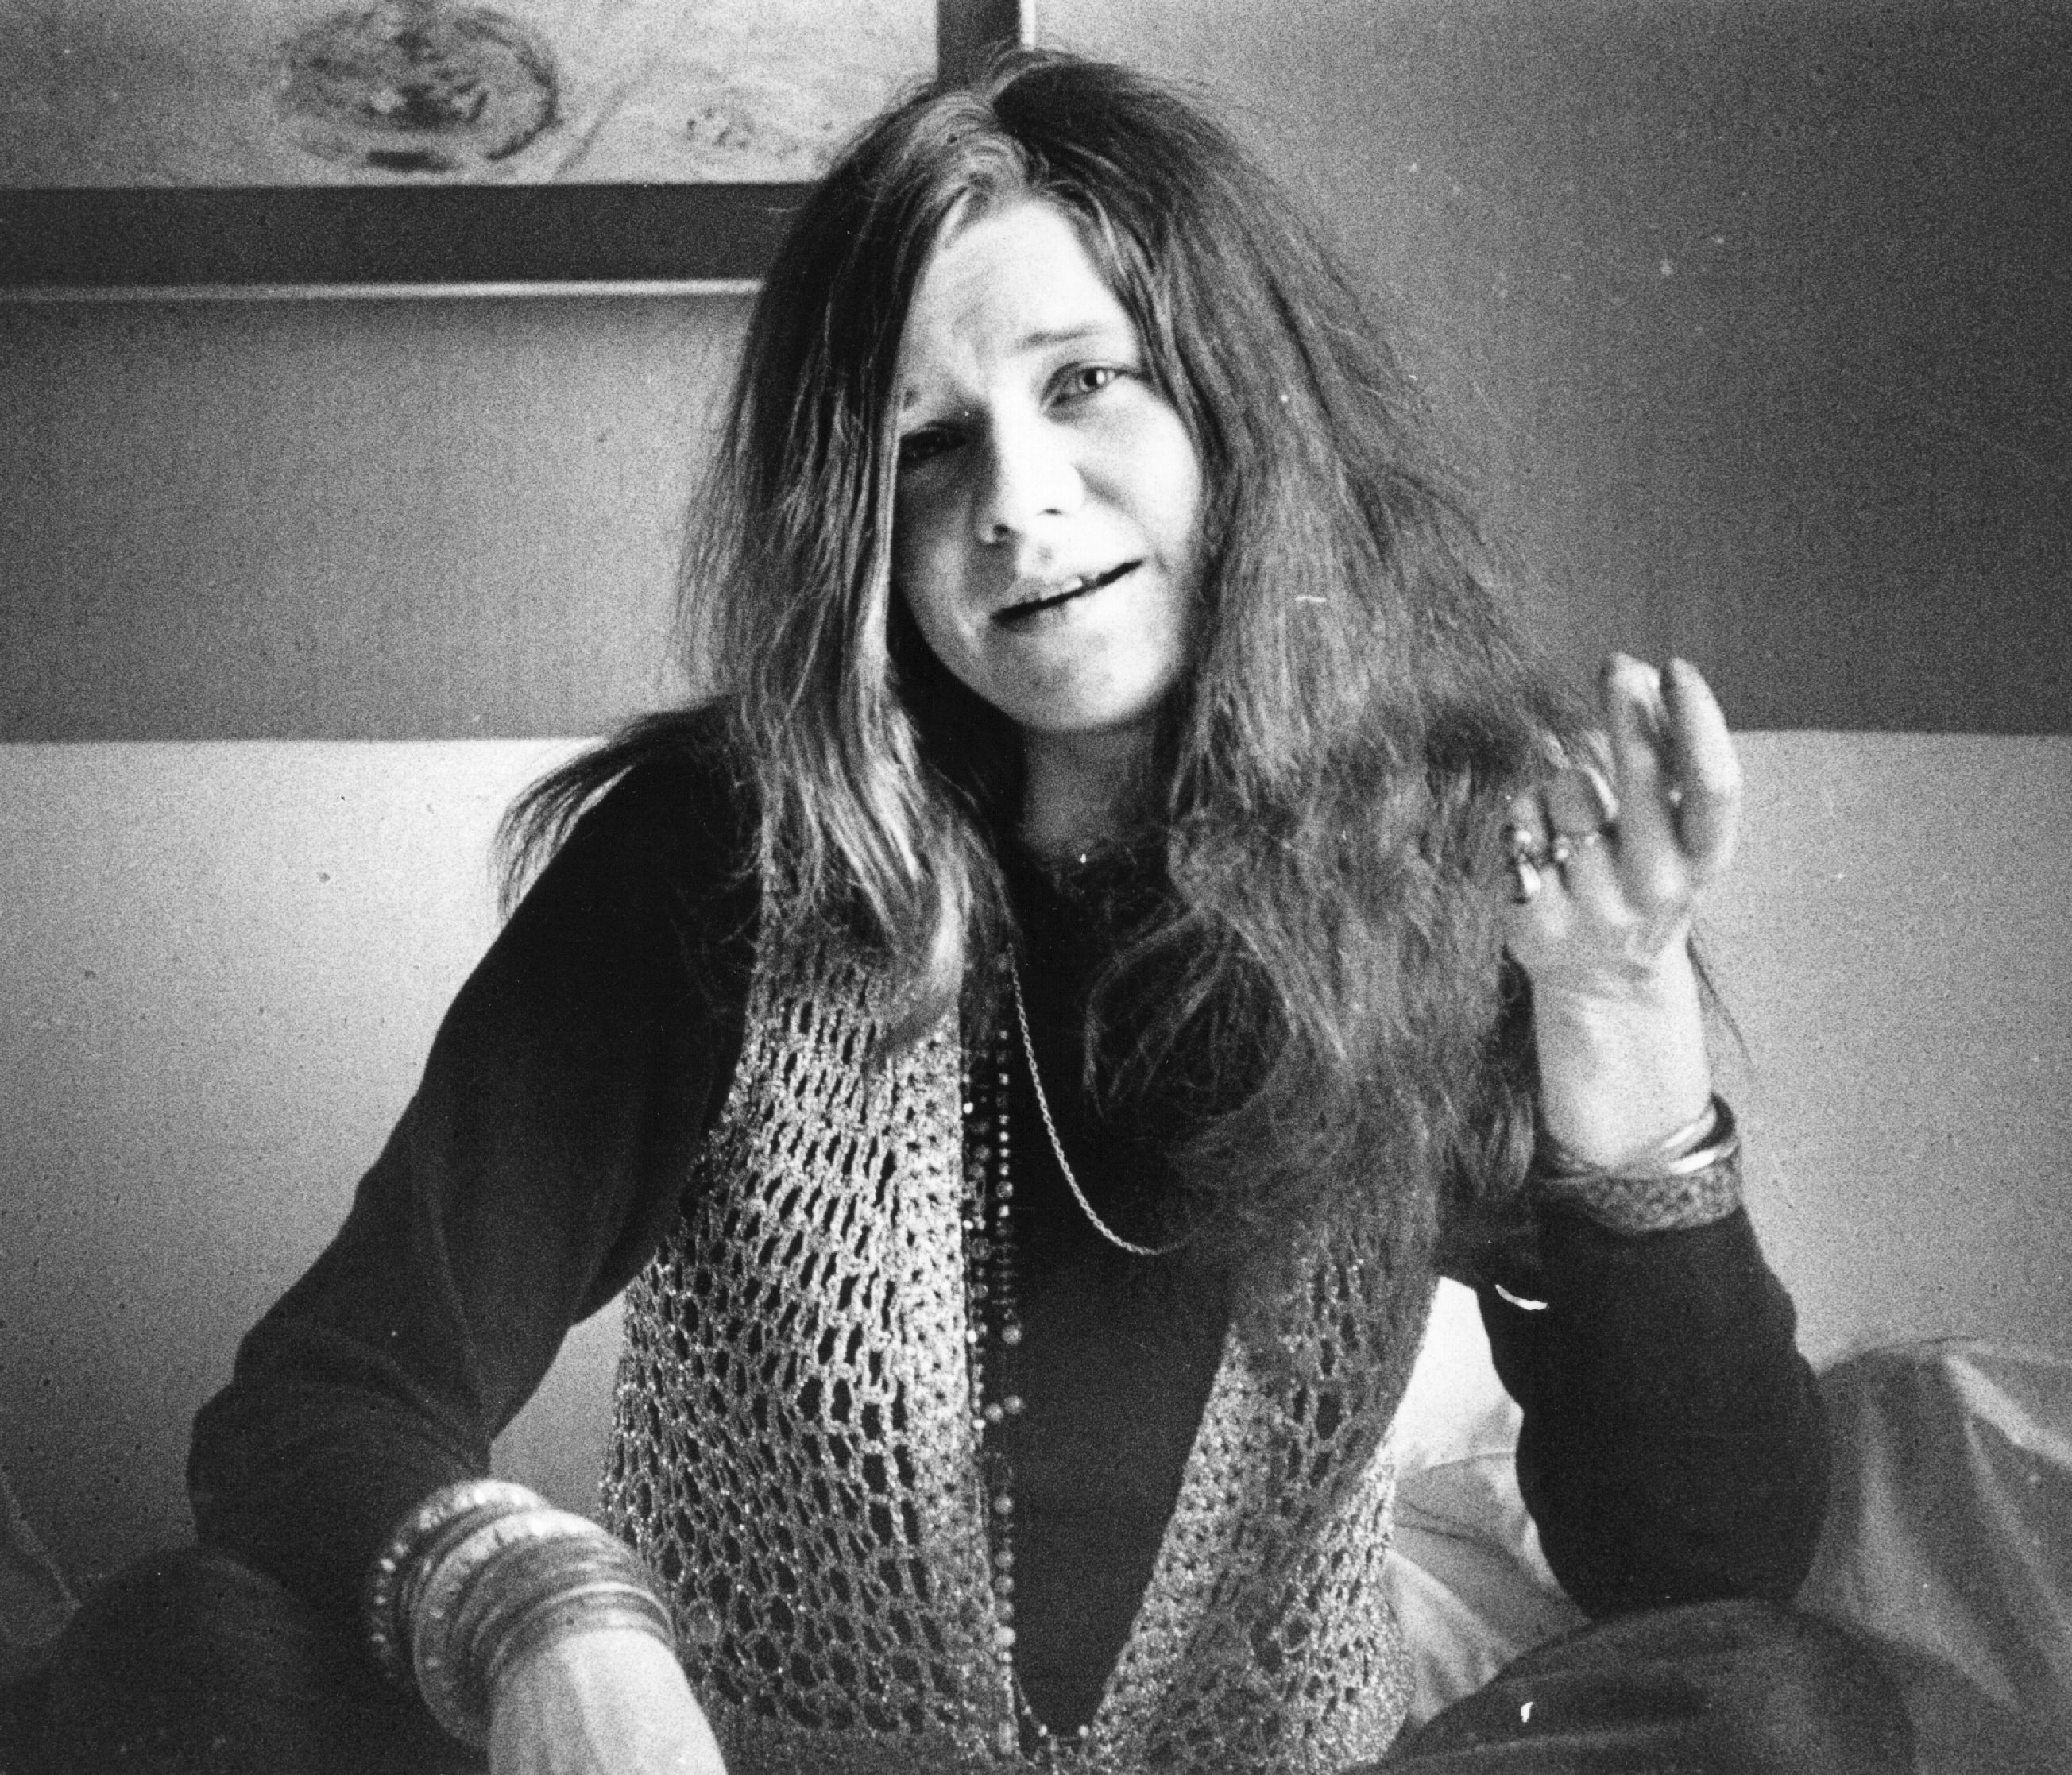 Janis Joplin sitting on a couch